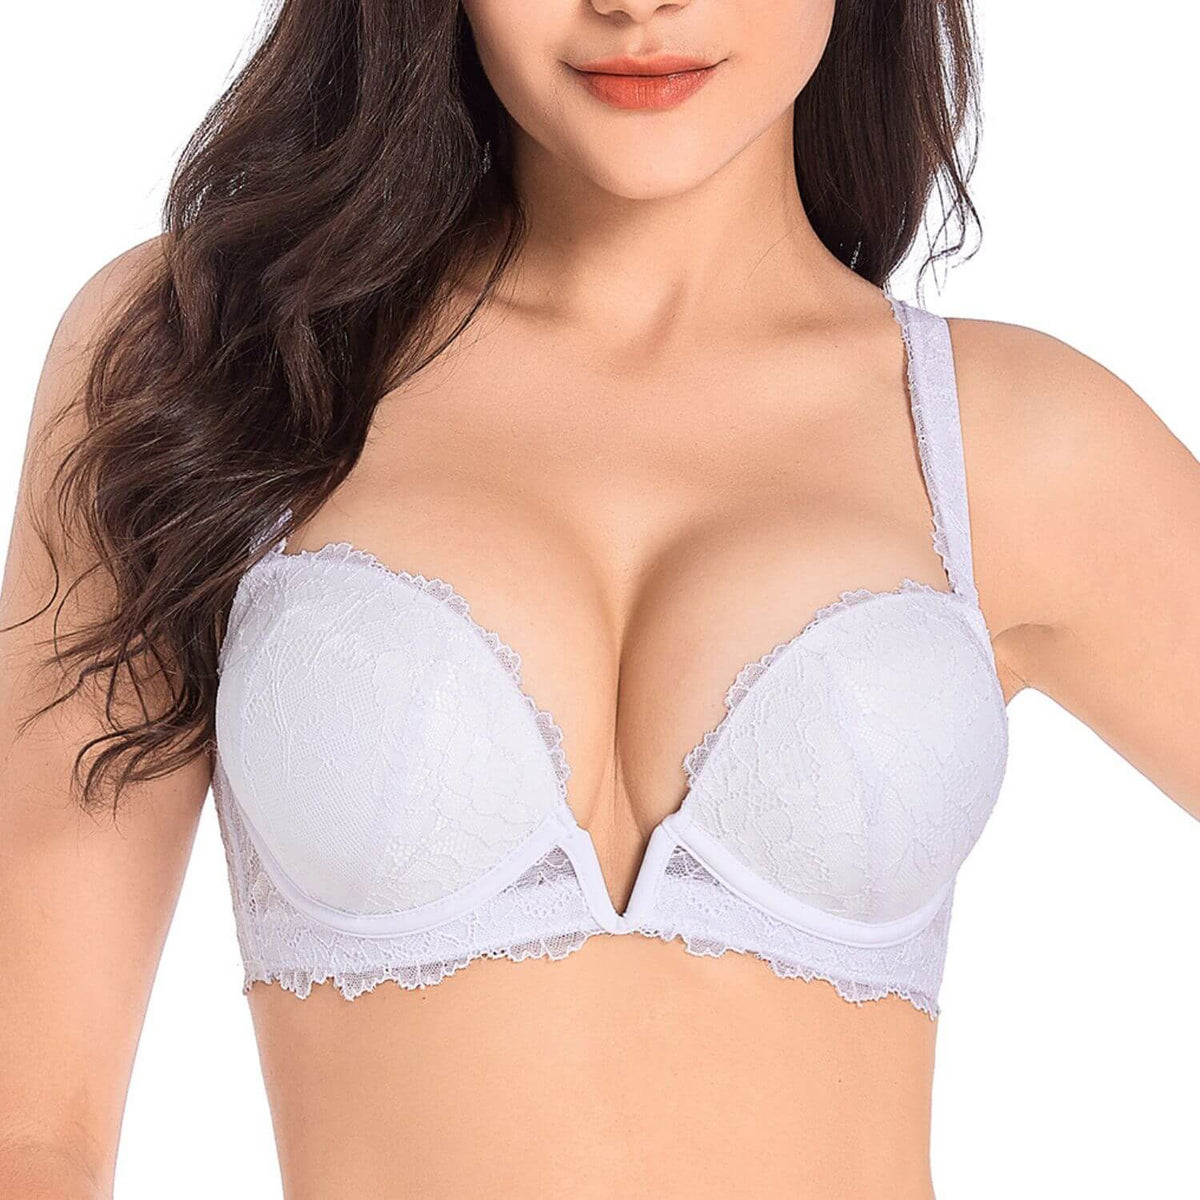 Small Boobs Ladies Bras Front Closure Push Up Brassiere Deep V